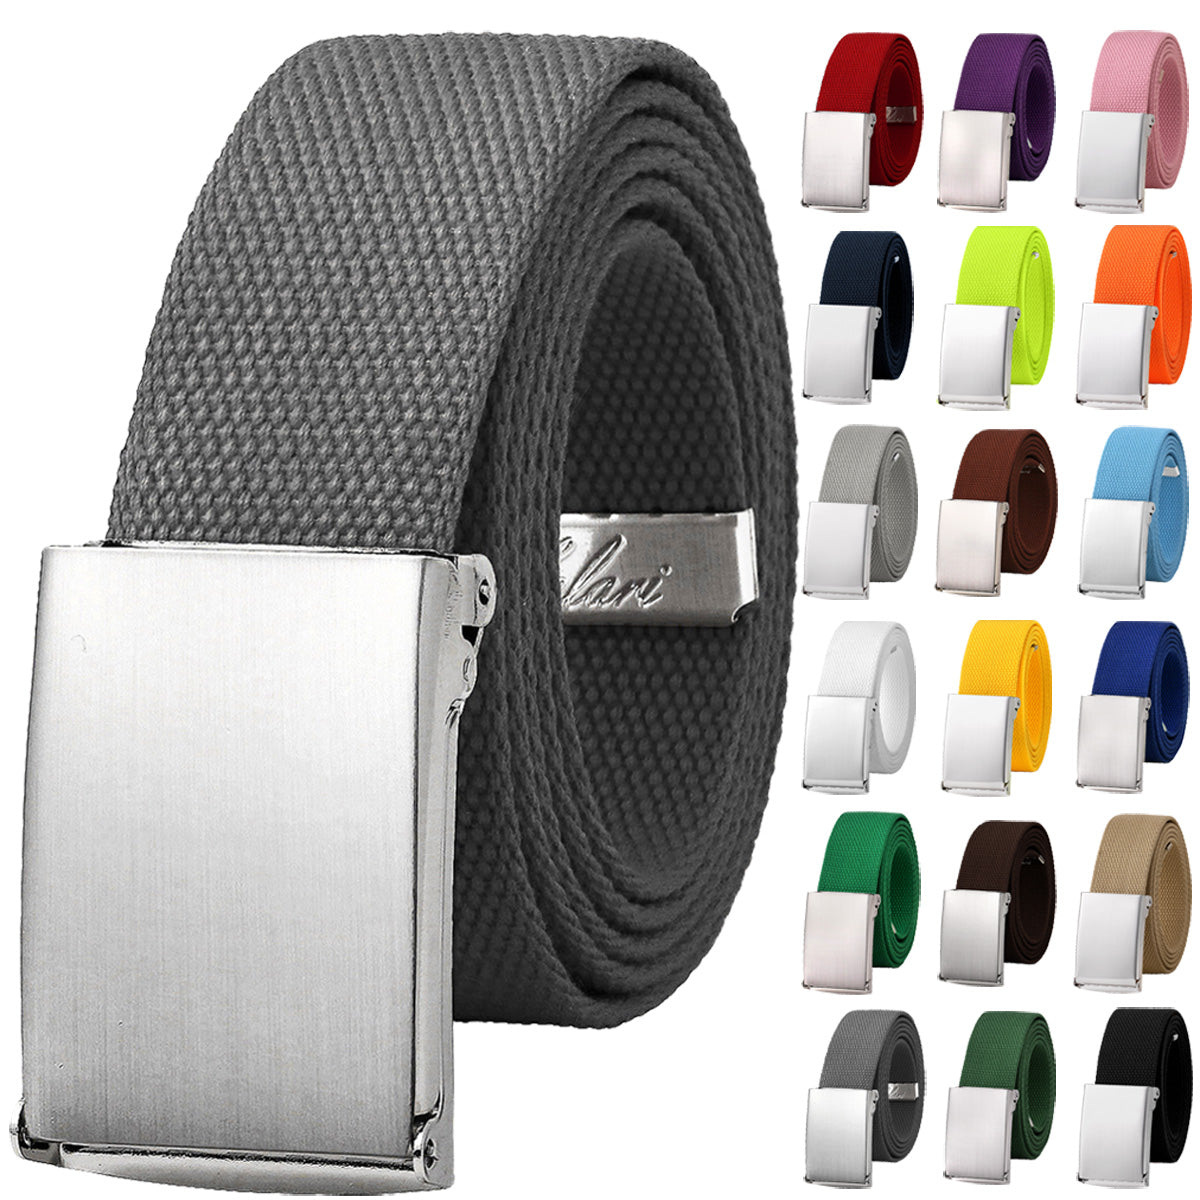 HQ Webbing Belts for Men Girls Ladies with Silver Buckle Plain Fabric